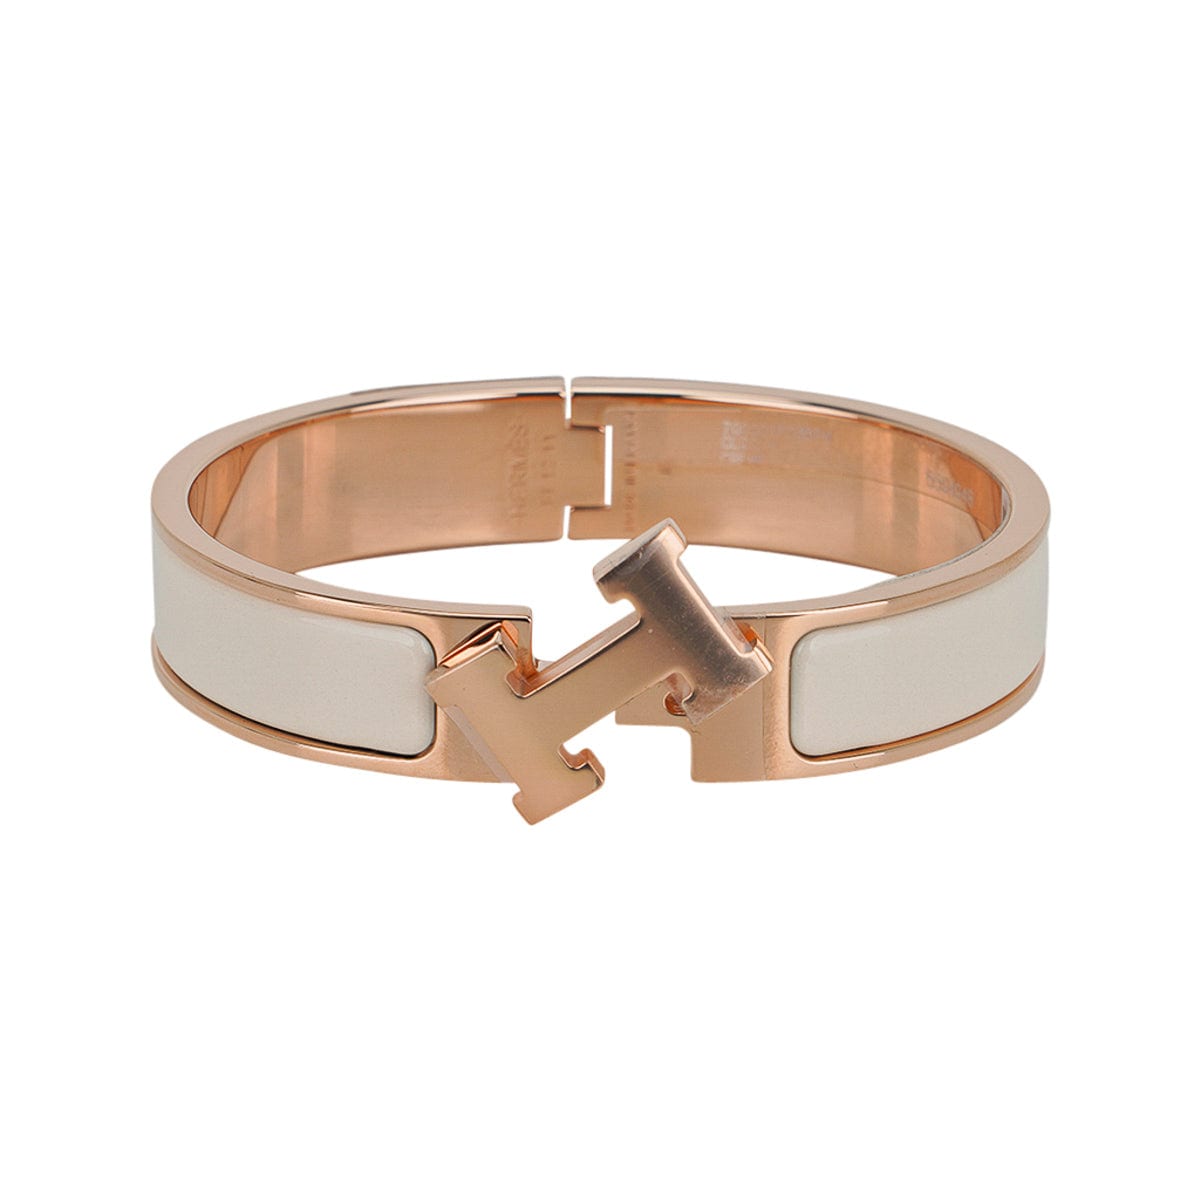 Hermes Clic H Bracelet Creme Enamel with Rose Gold Size Small